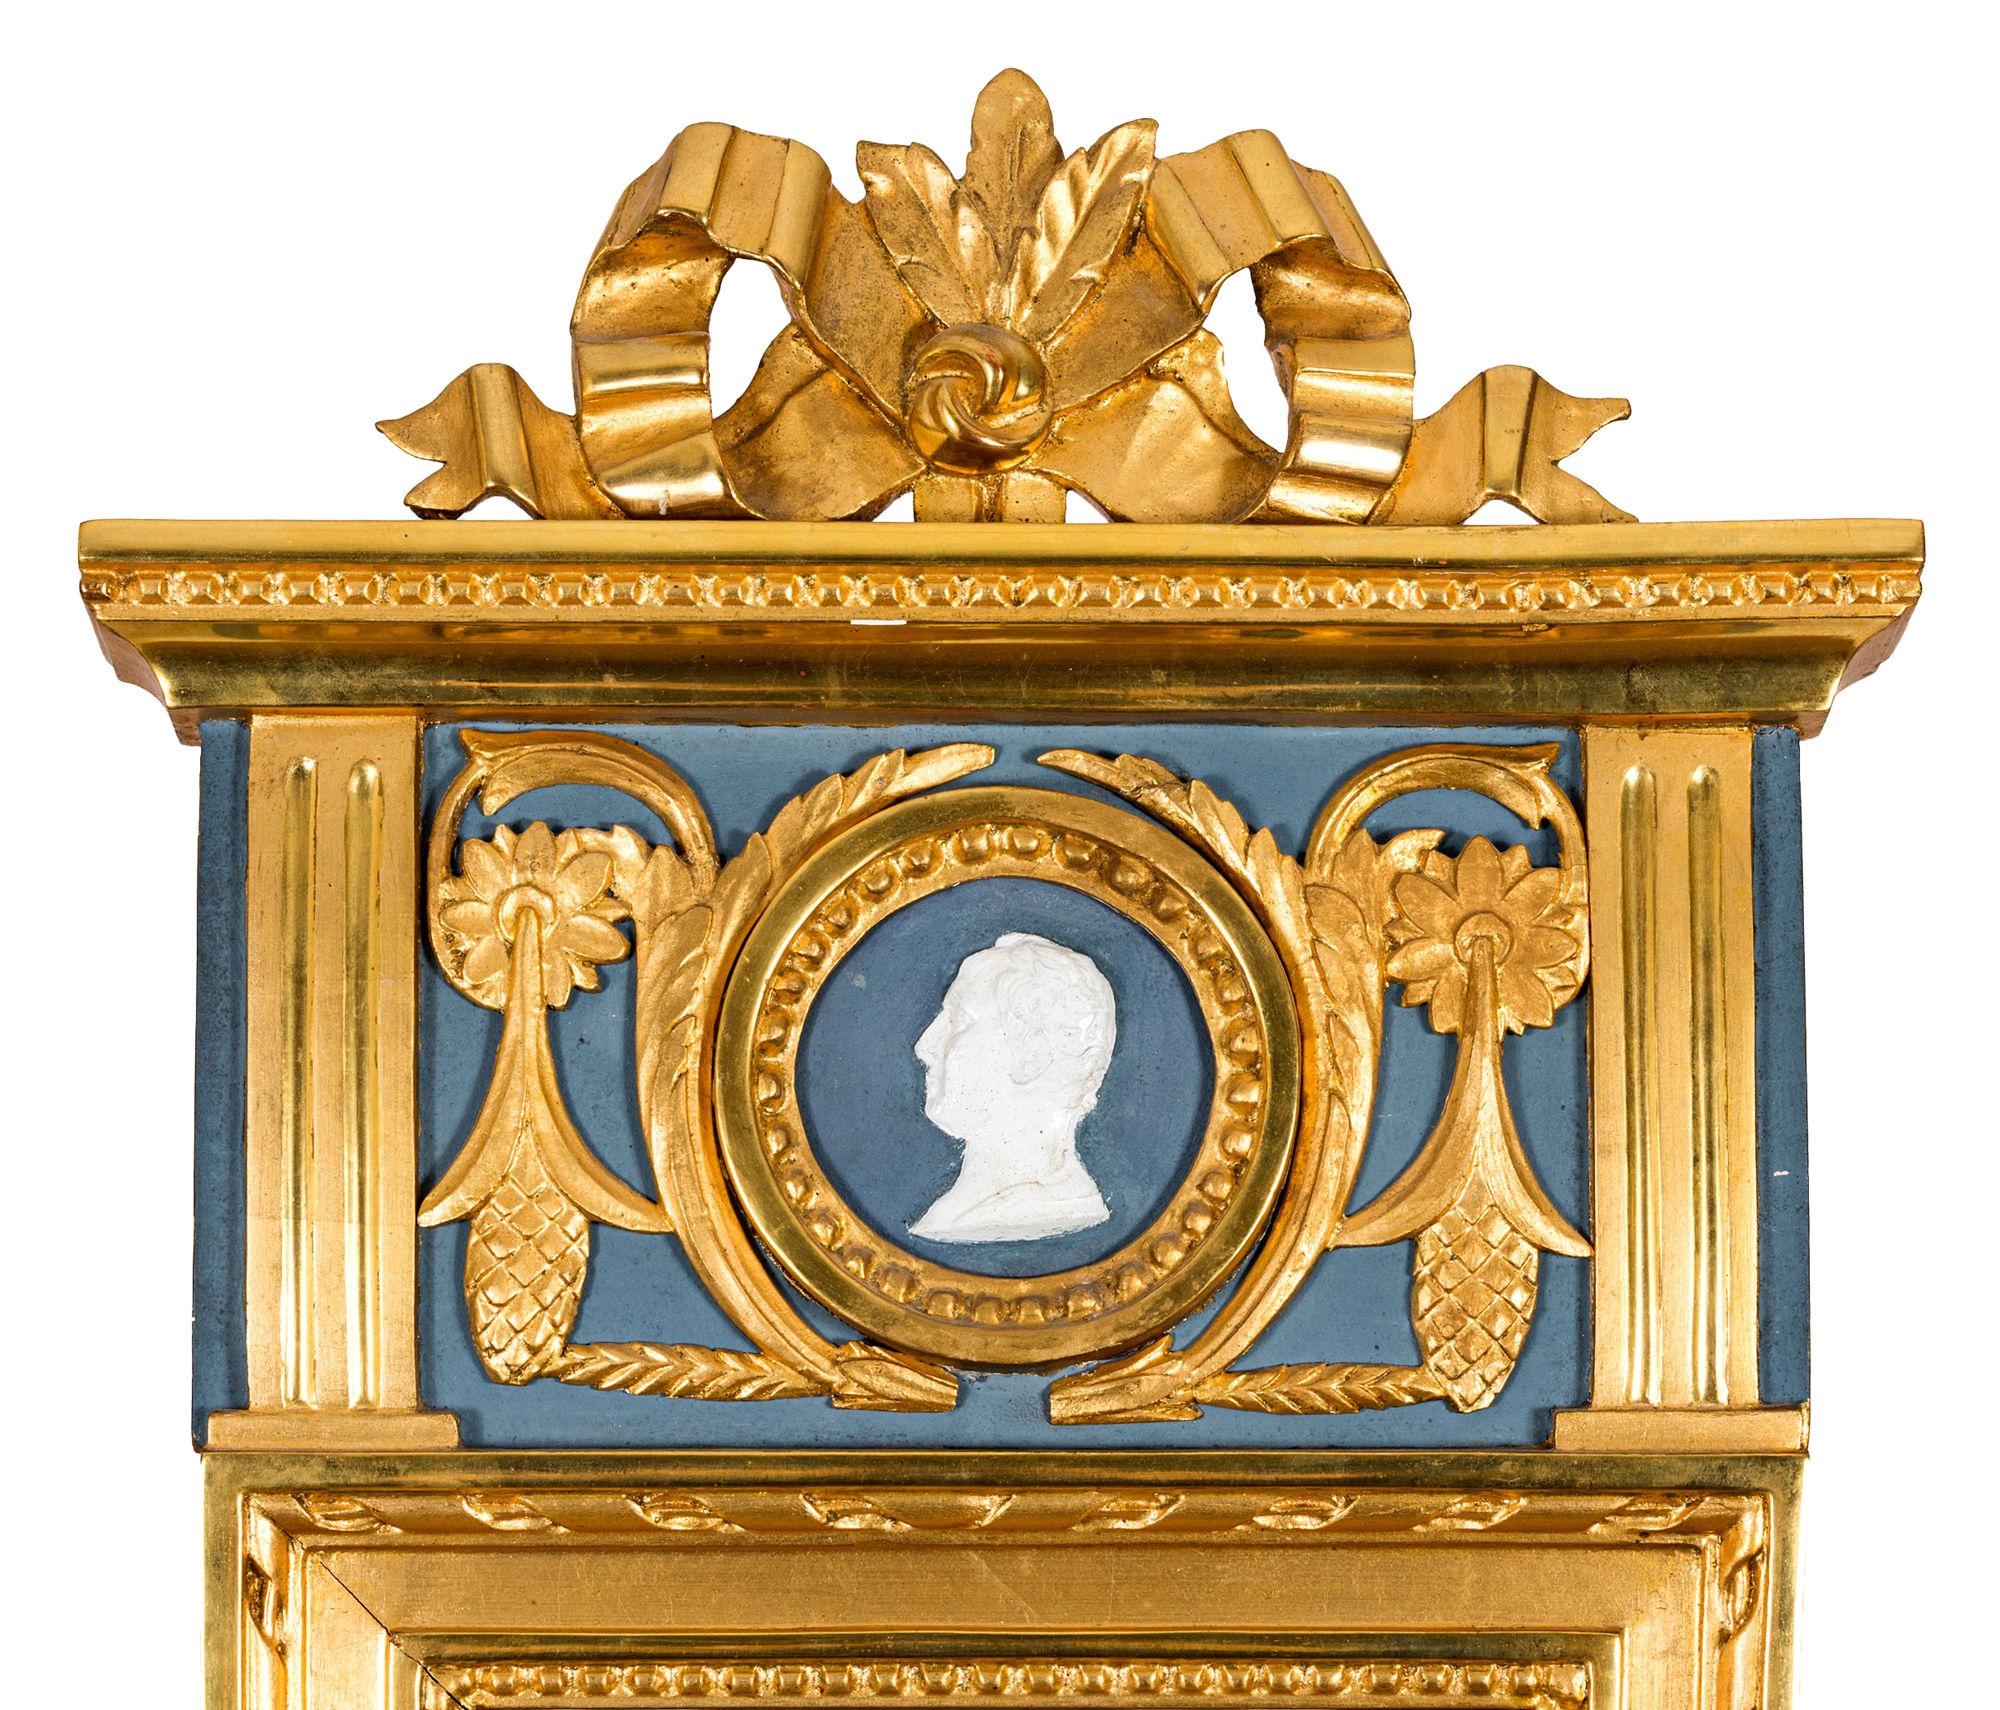 Bedustavian Stockholm work, with Stockholm hallmark with date 1798 ?, bronzed and gilded, painted upper decorative field with medallion with men's profile, crowned band rosette, mirror edged with pearl bar, measures: 94 x 39 cm.
This diminutive